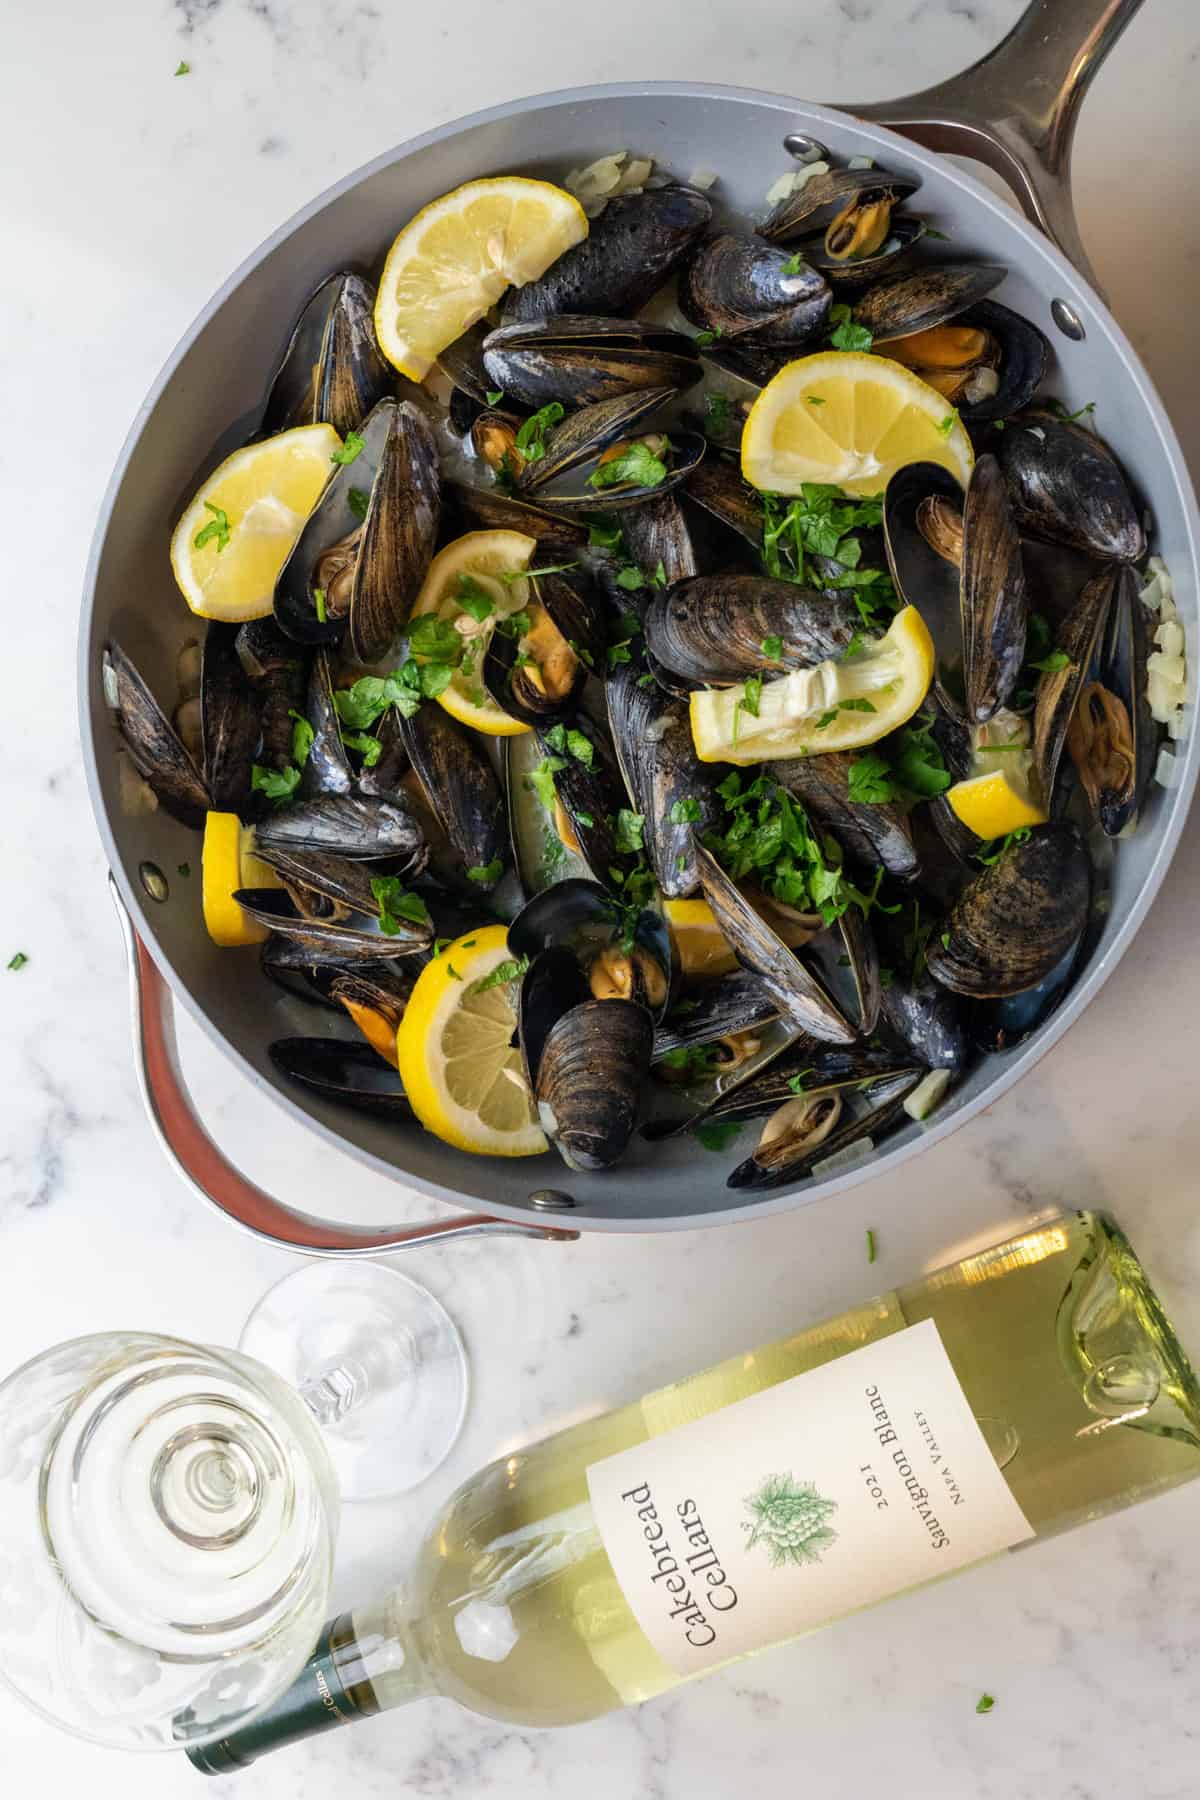 This Steamed Mussels Recipe with White Wine Cream Sauce is made with mussels, butter, garlic cloves, onion, wine, cream, lemon, and parsley.